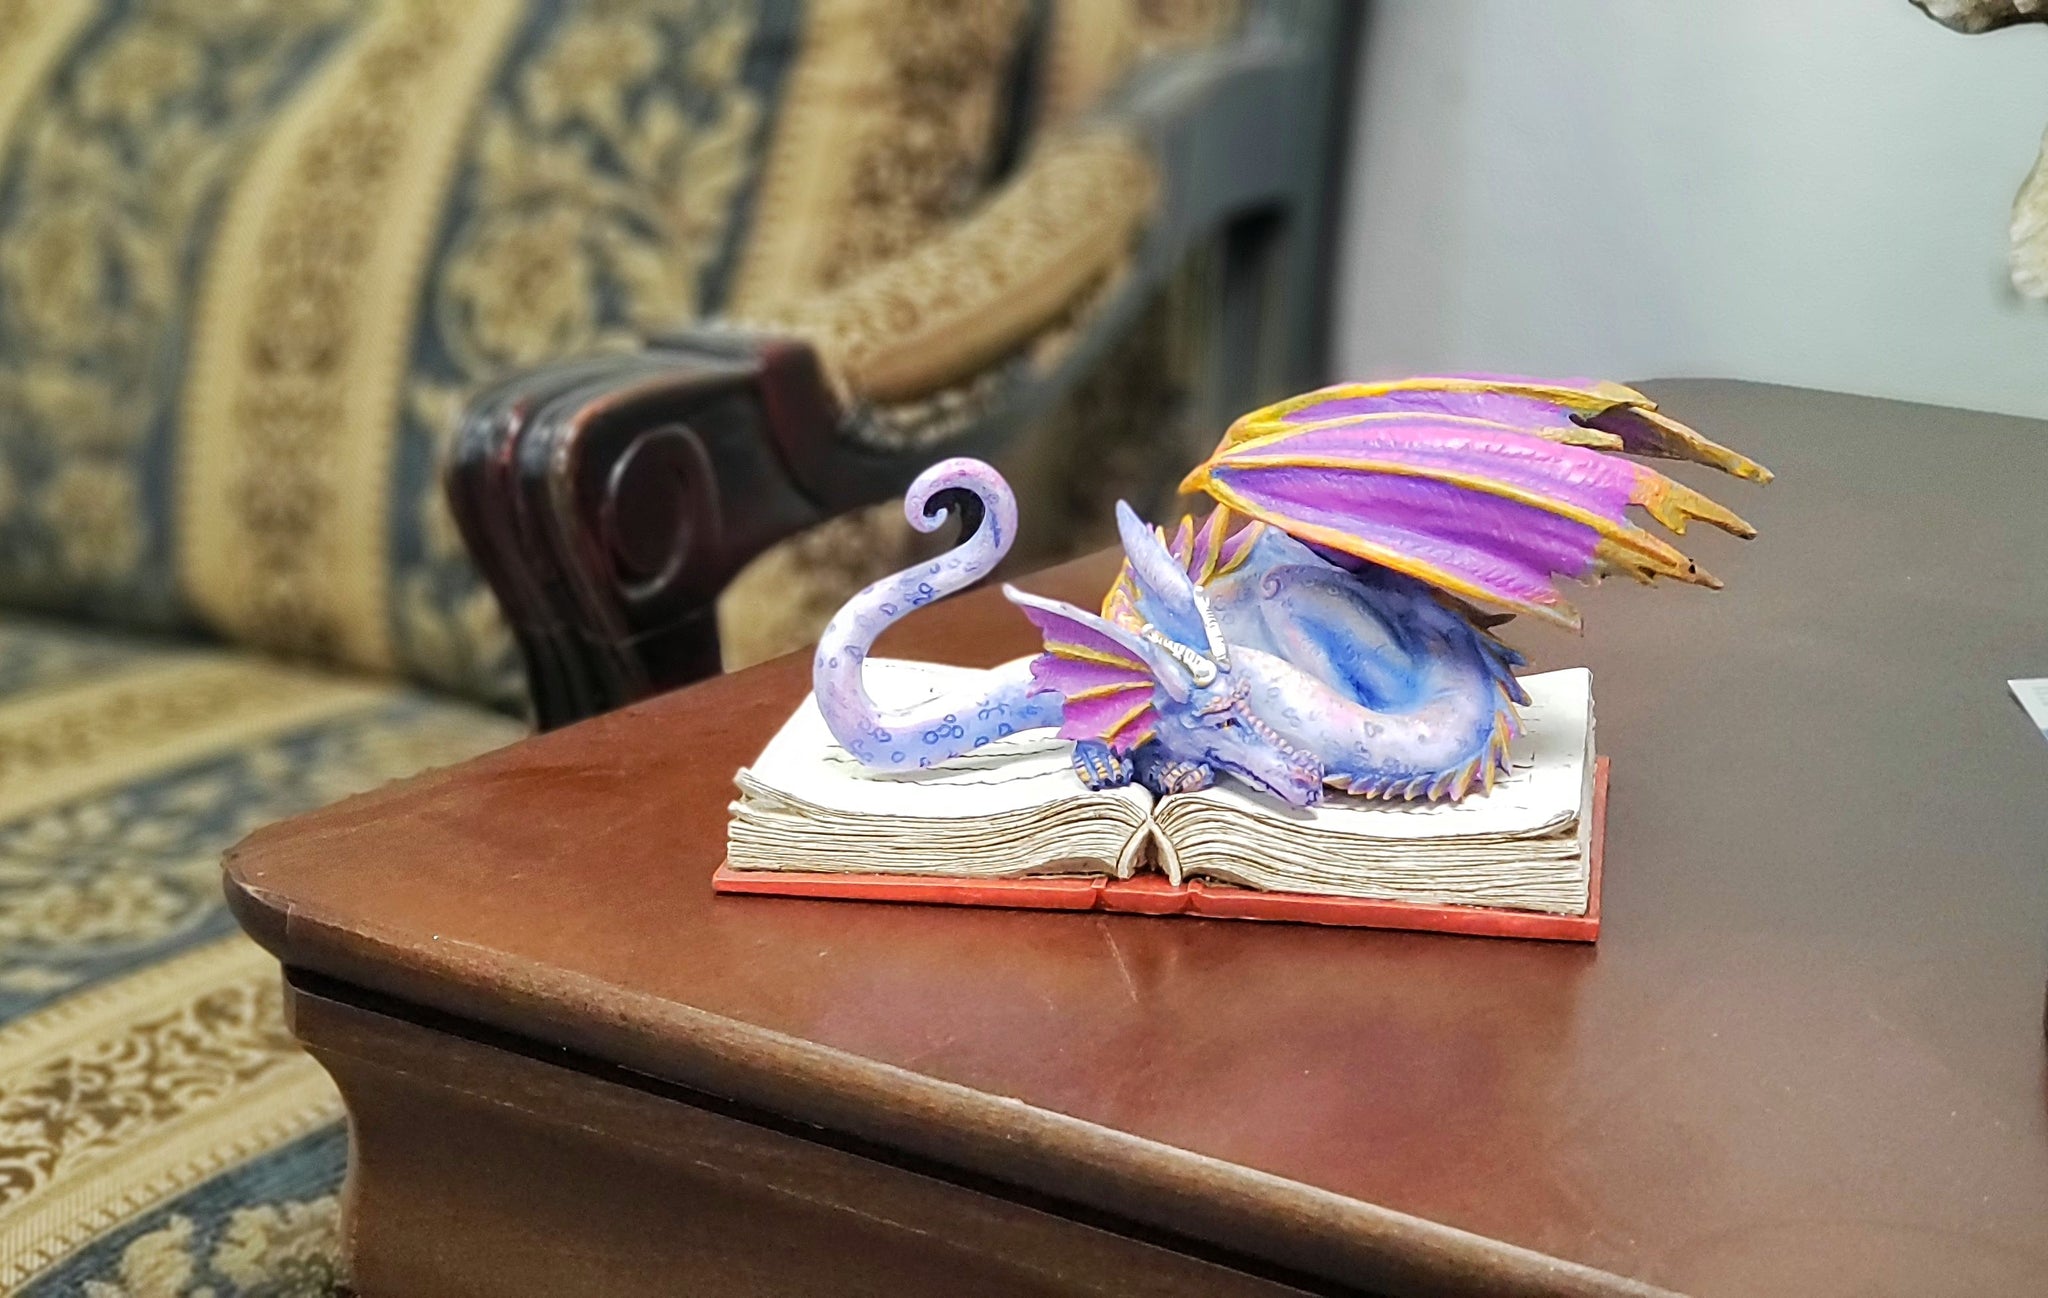 Book Wyrmill Dragon Text Book Statue by Amy Brown Studying Mystical Purple Dragon